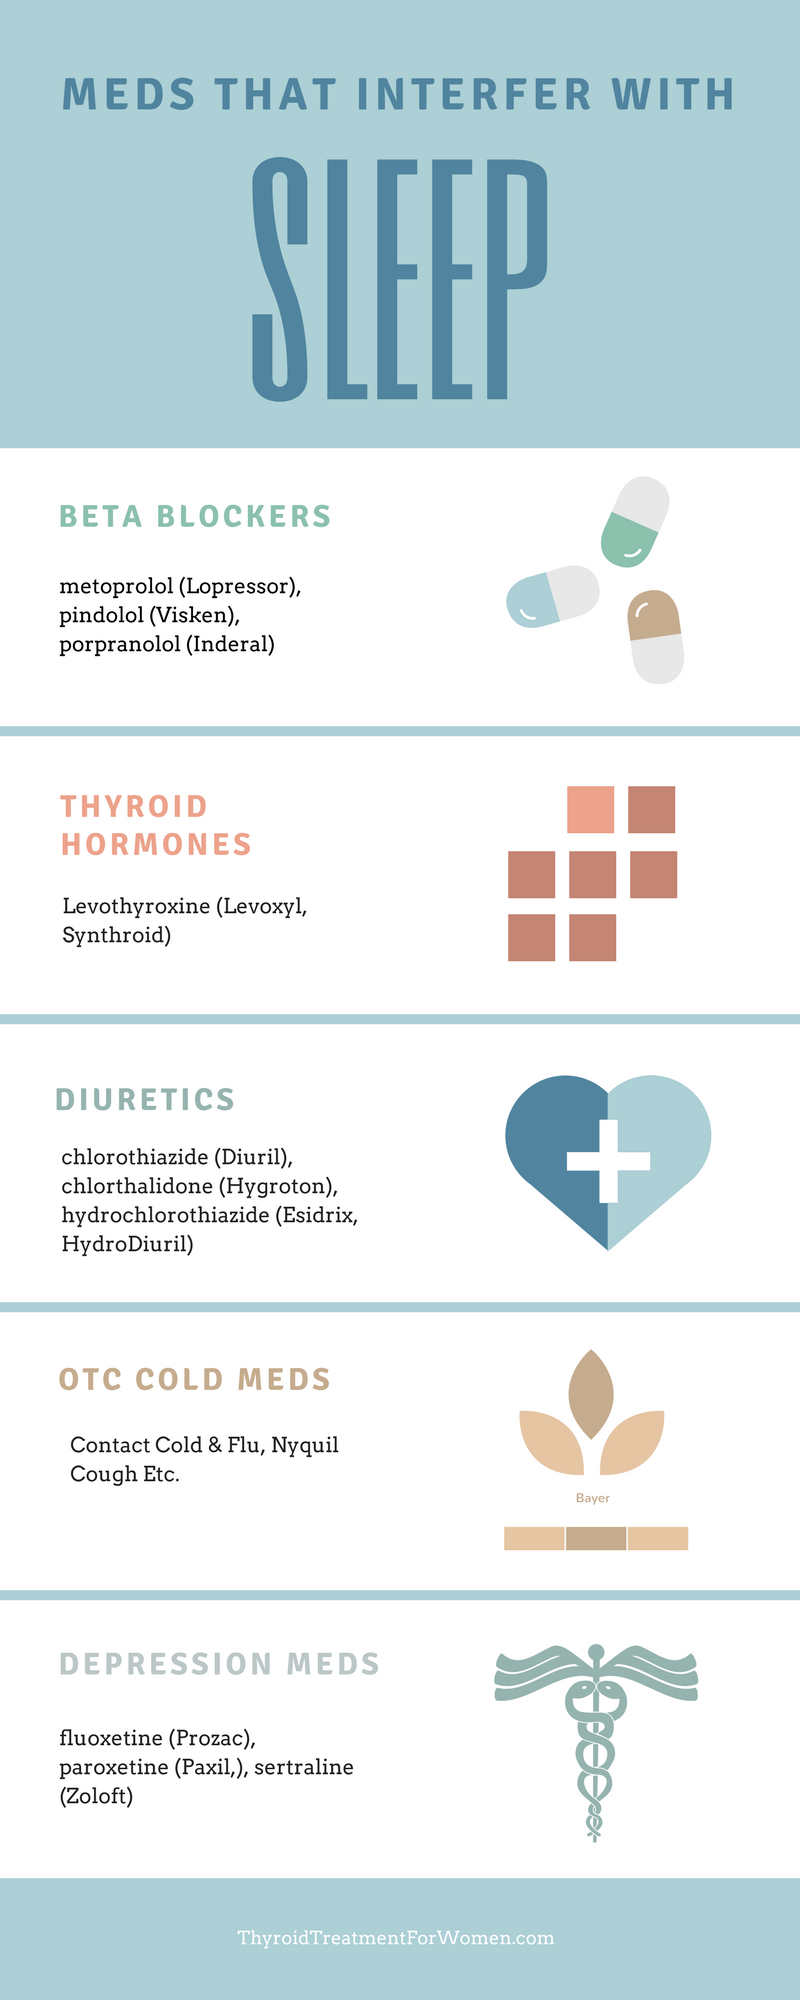 Medications that interfer with sleep. If  you aren't sleeping well these could be the problem. #sleepproblems #thyroidhealth #medications @thyroidtreatmentforwomen